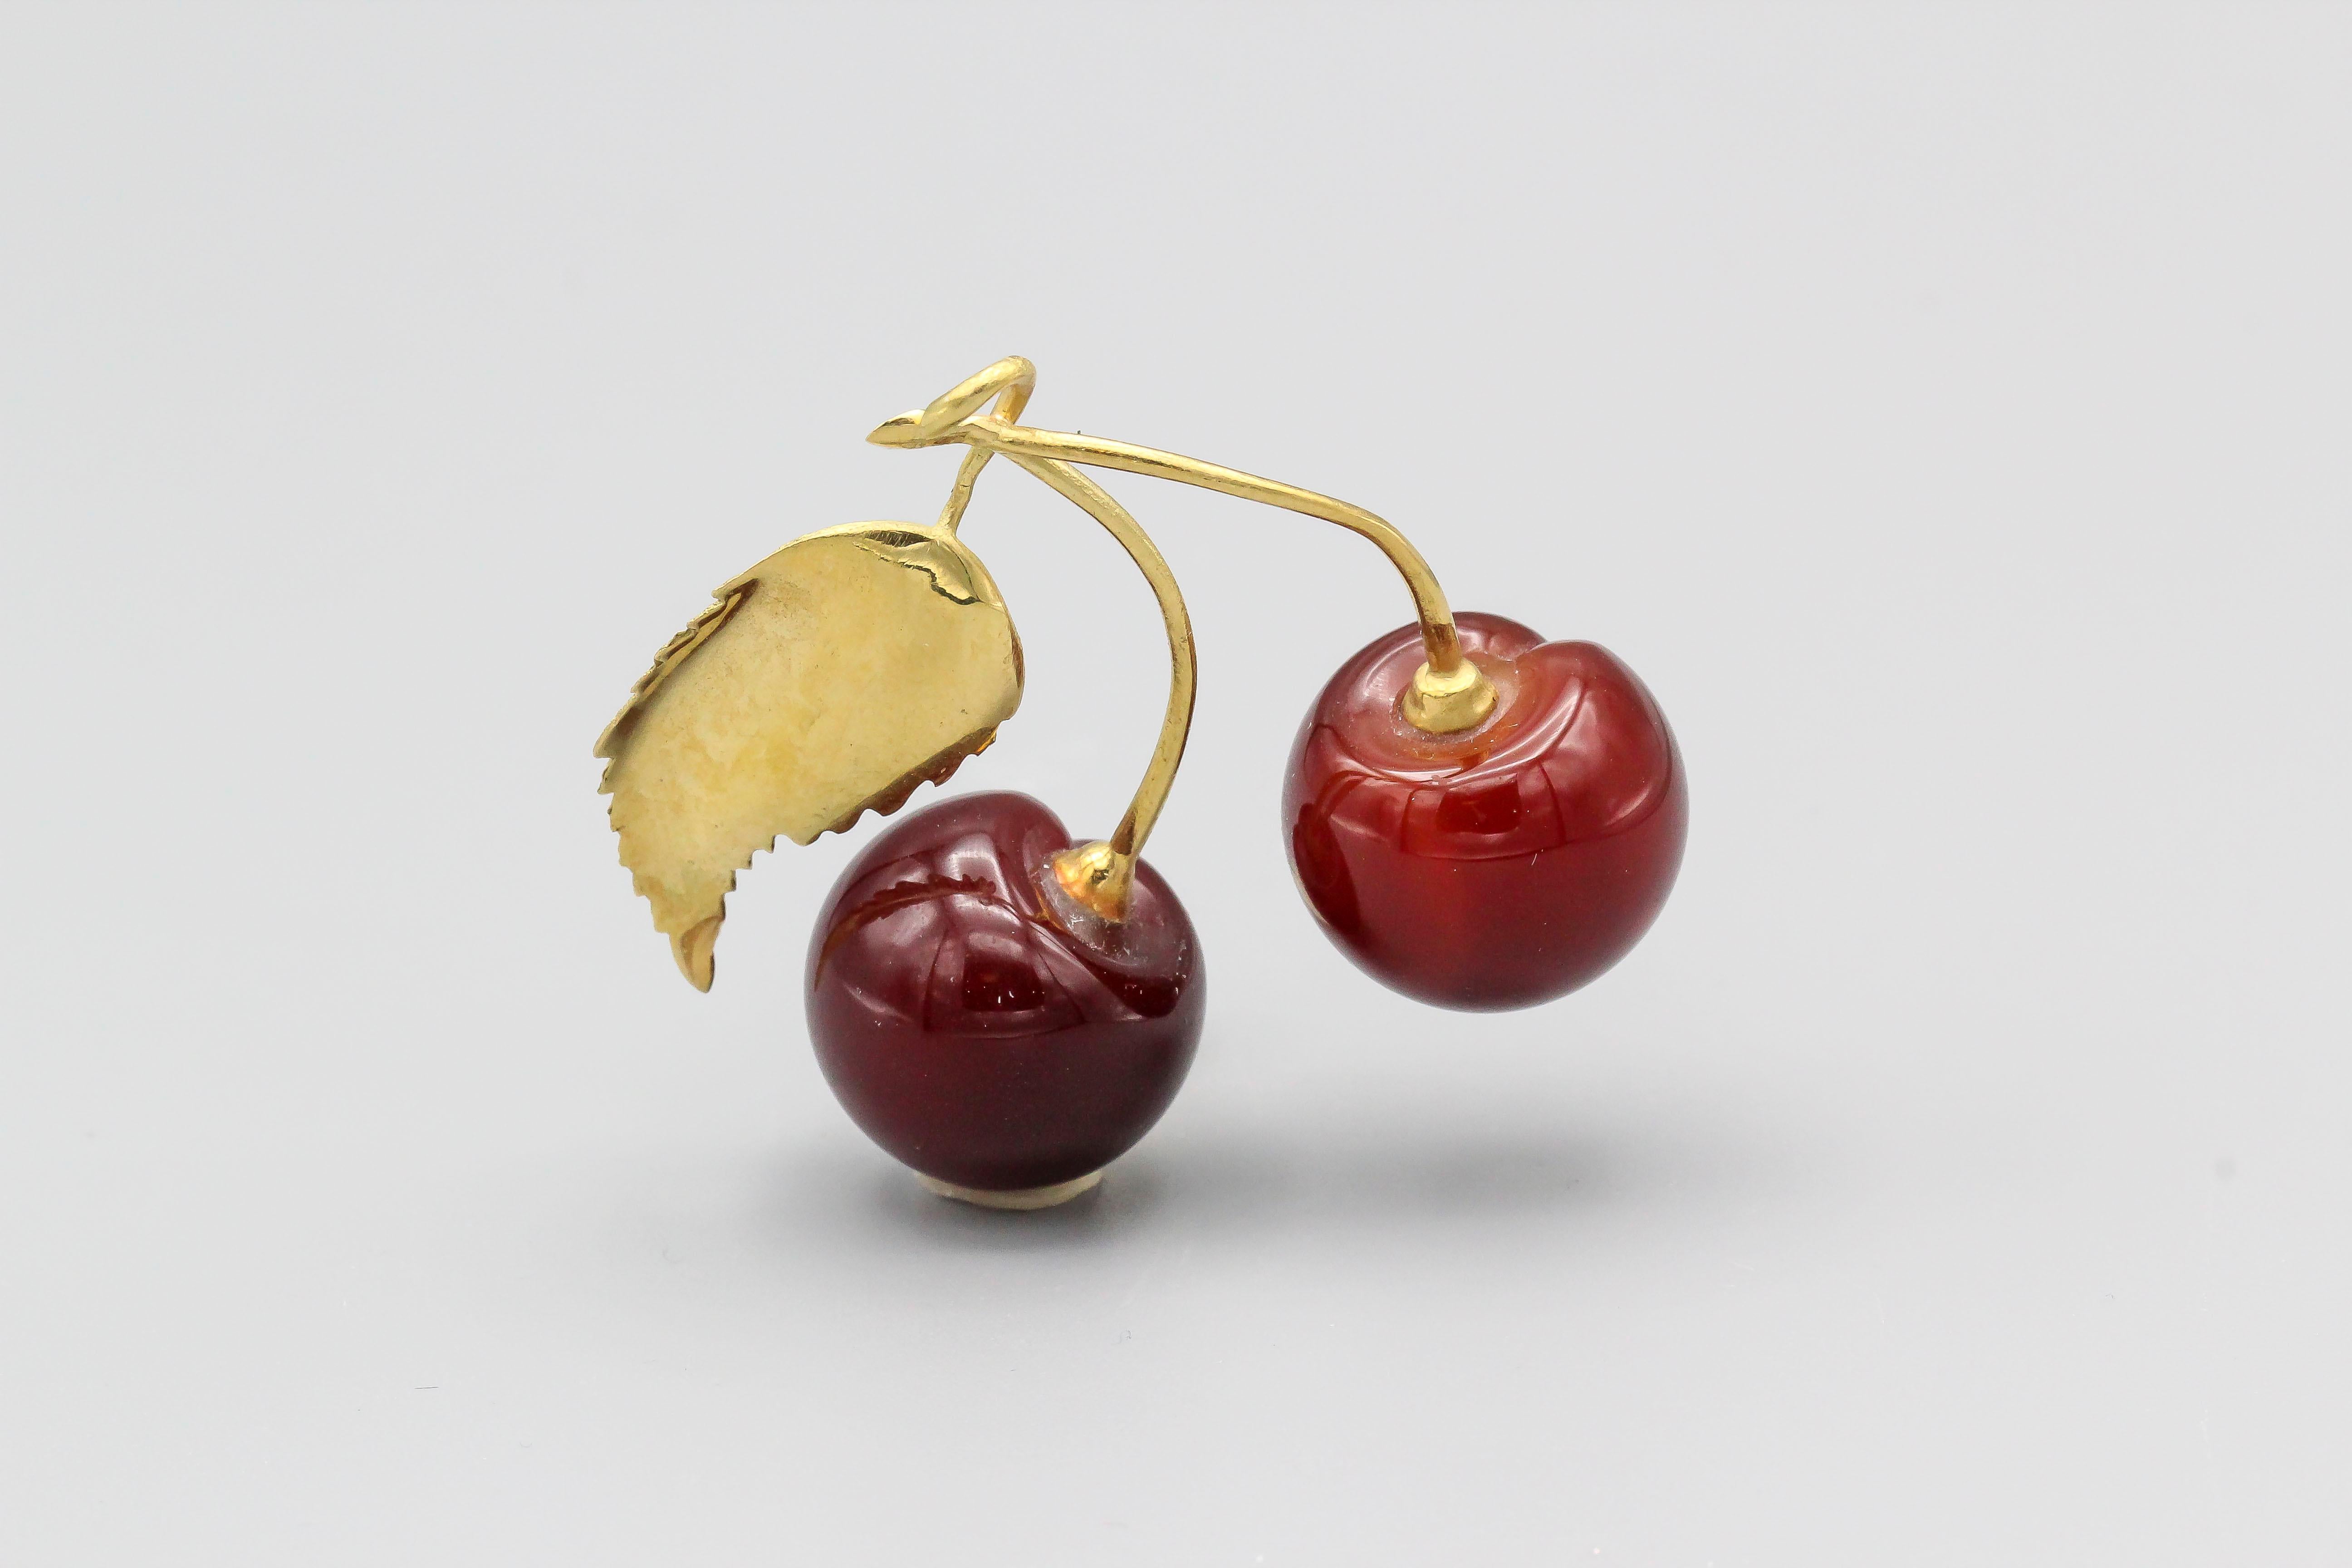 Fine carved carnelian and 18k yellow gold cherries by Vacheron Constantin. It resembles the actual fruit quite accurately, with gold as the top leaf and stem.

Hallmarks: Vacheron Constantin maker's mark, 750.